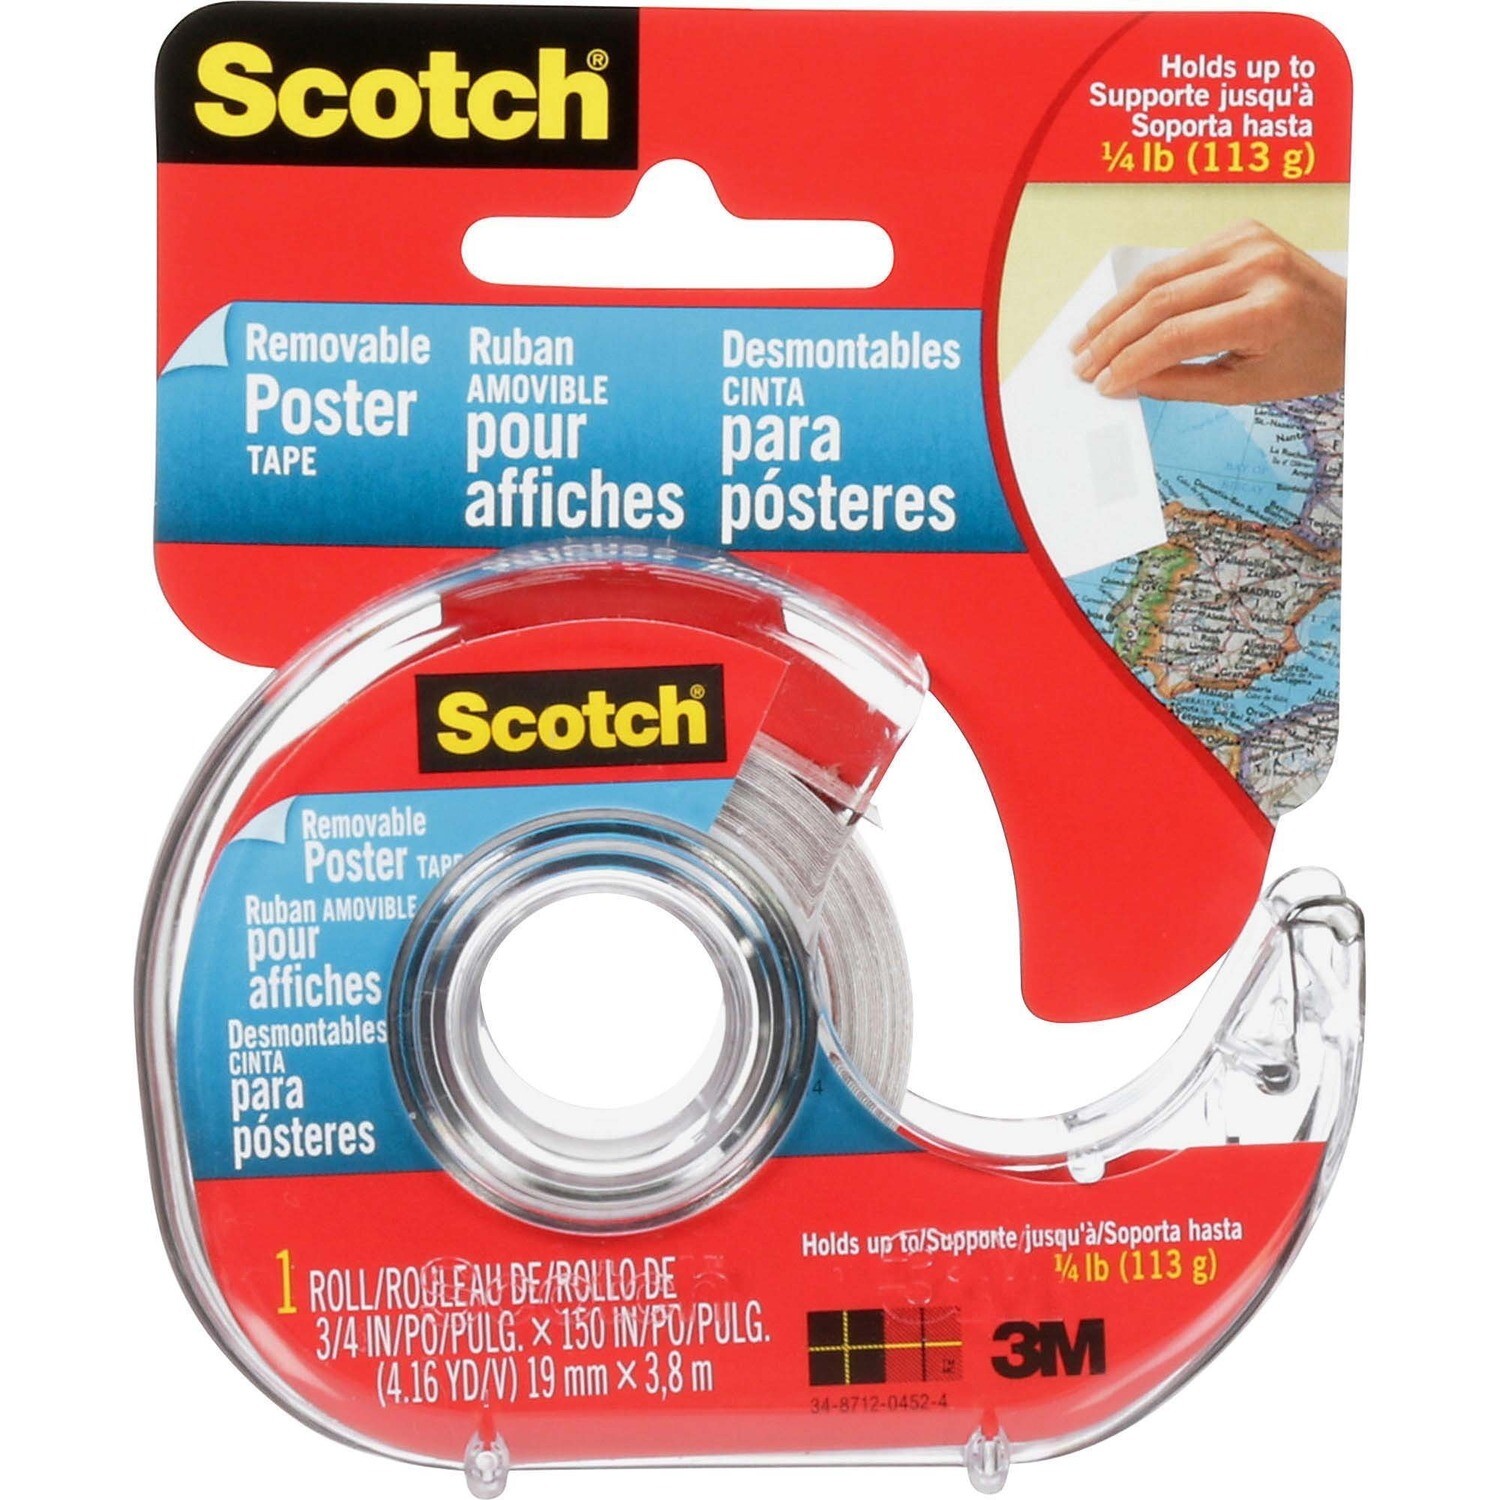 Tape, Removable Poster 19.1mm x 3.8m, Scotch